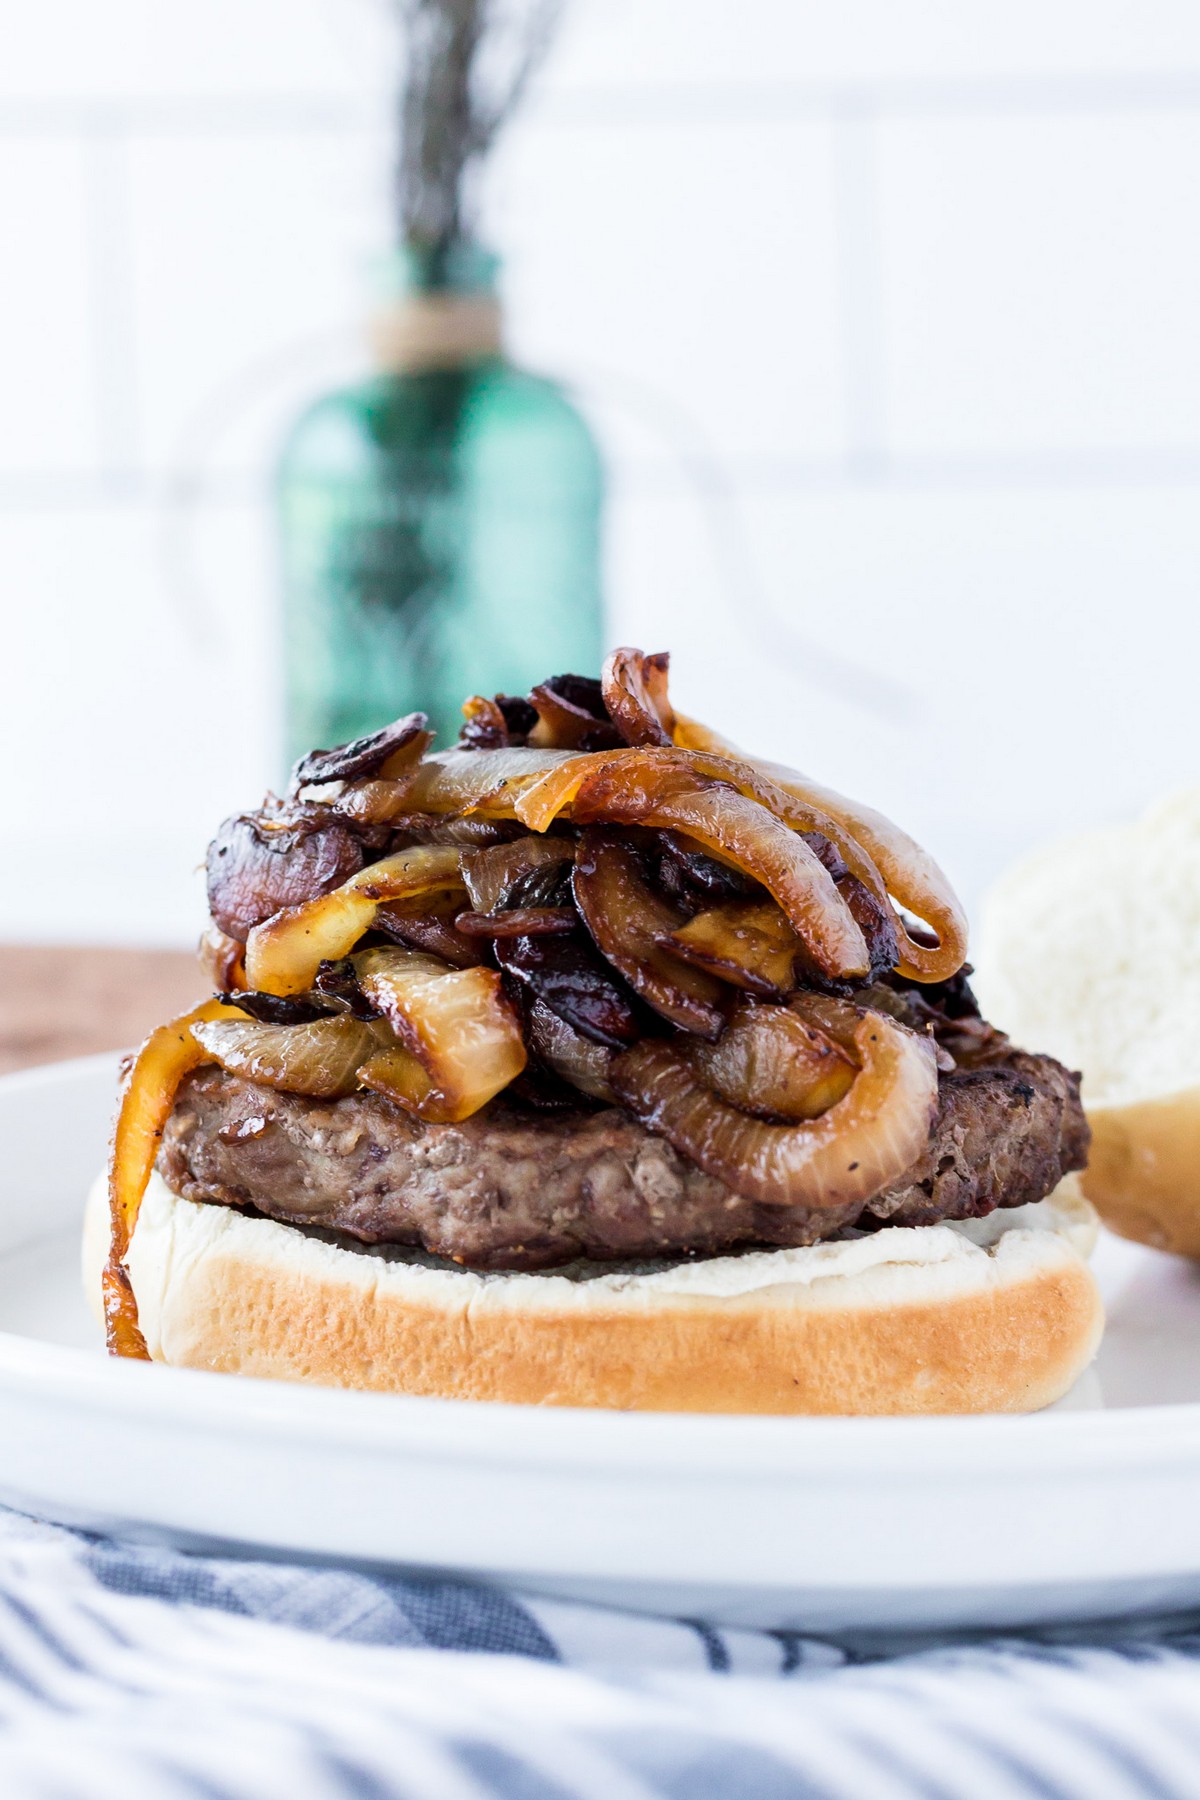 caramelized onions and mushrooms on a burger